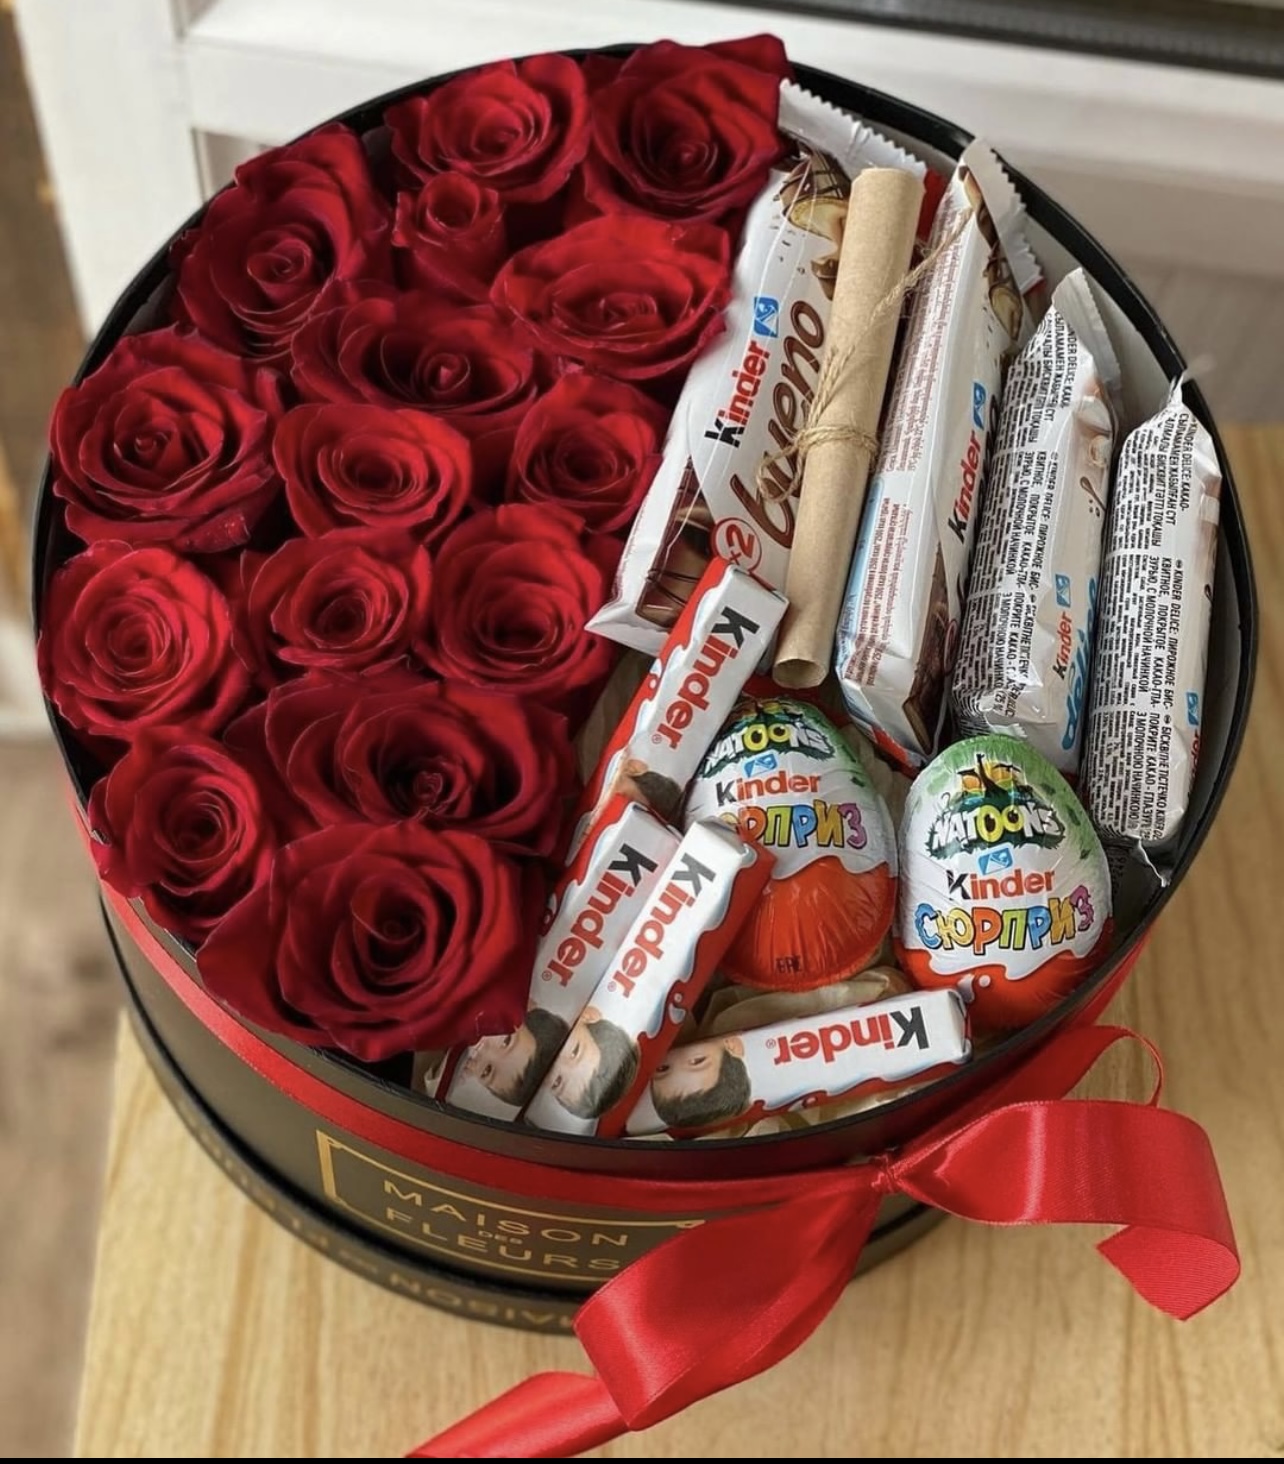 For your love: Red roses